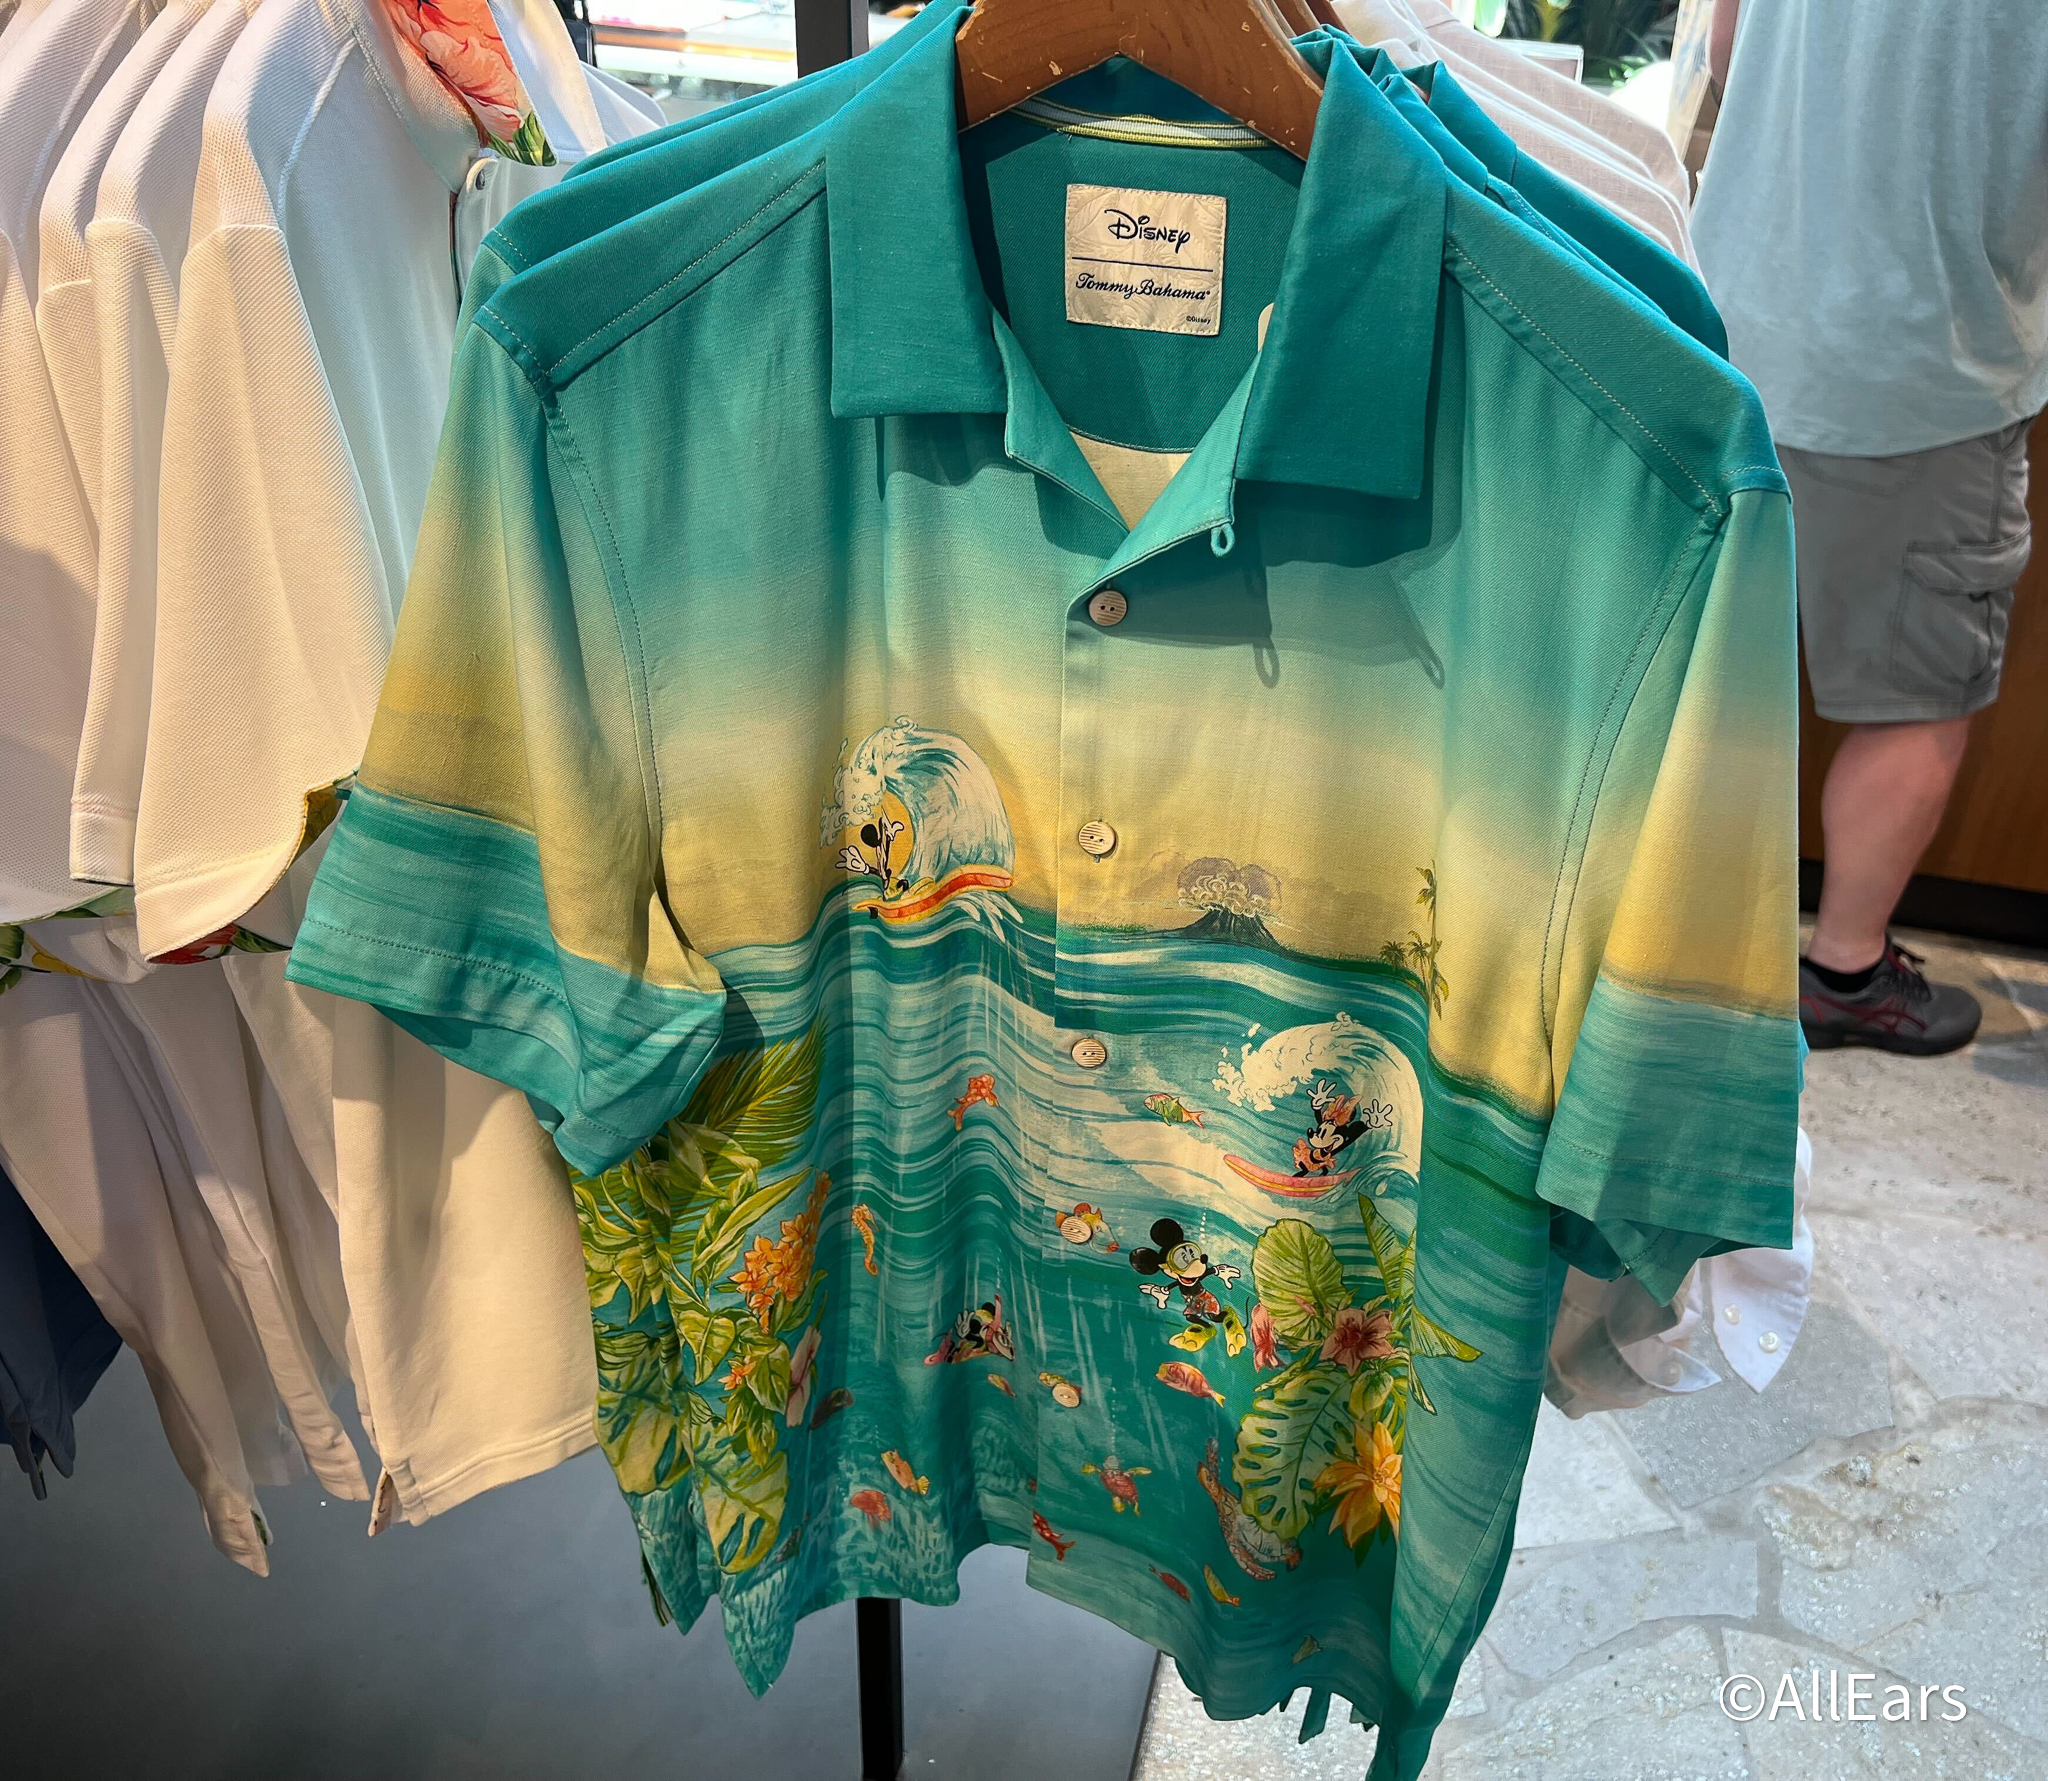 https://allears.net/wp-content/uploads/2023/03/2023-wdw-disney-springs-tommy-bahama-mickey-and-minnie-surfing-green-button-up-shirt.jpg